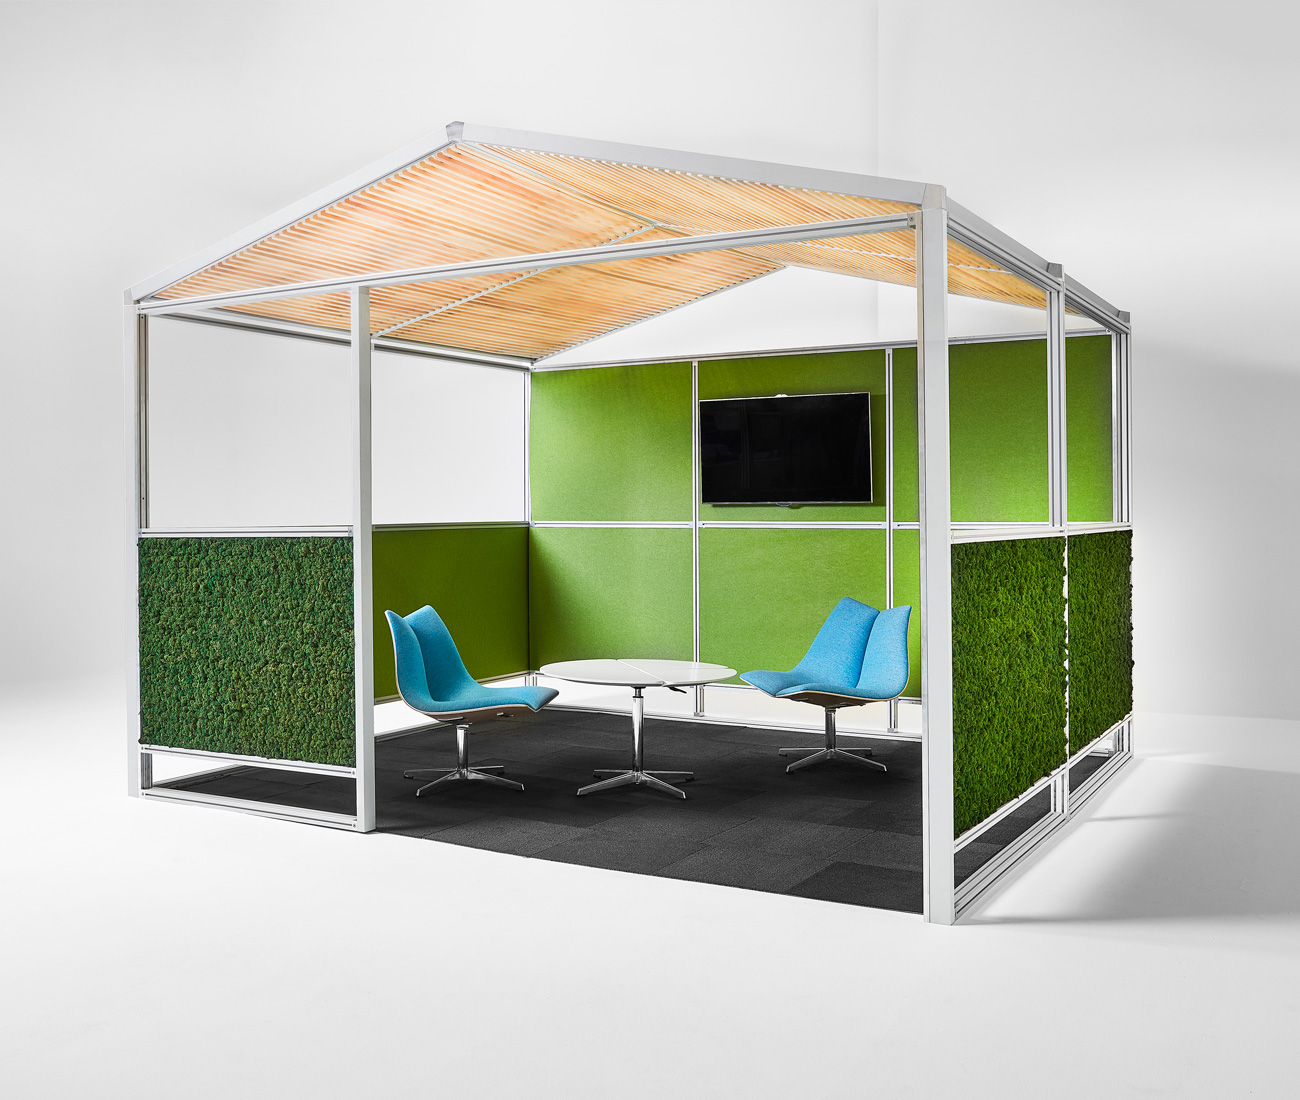 Designed by Nienkämper, the Gazebo Meeting Pod incorporates green elements while solving a problem many open-plan workspaces face – a lack of private space.